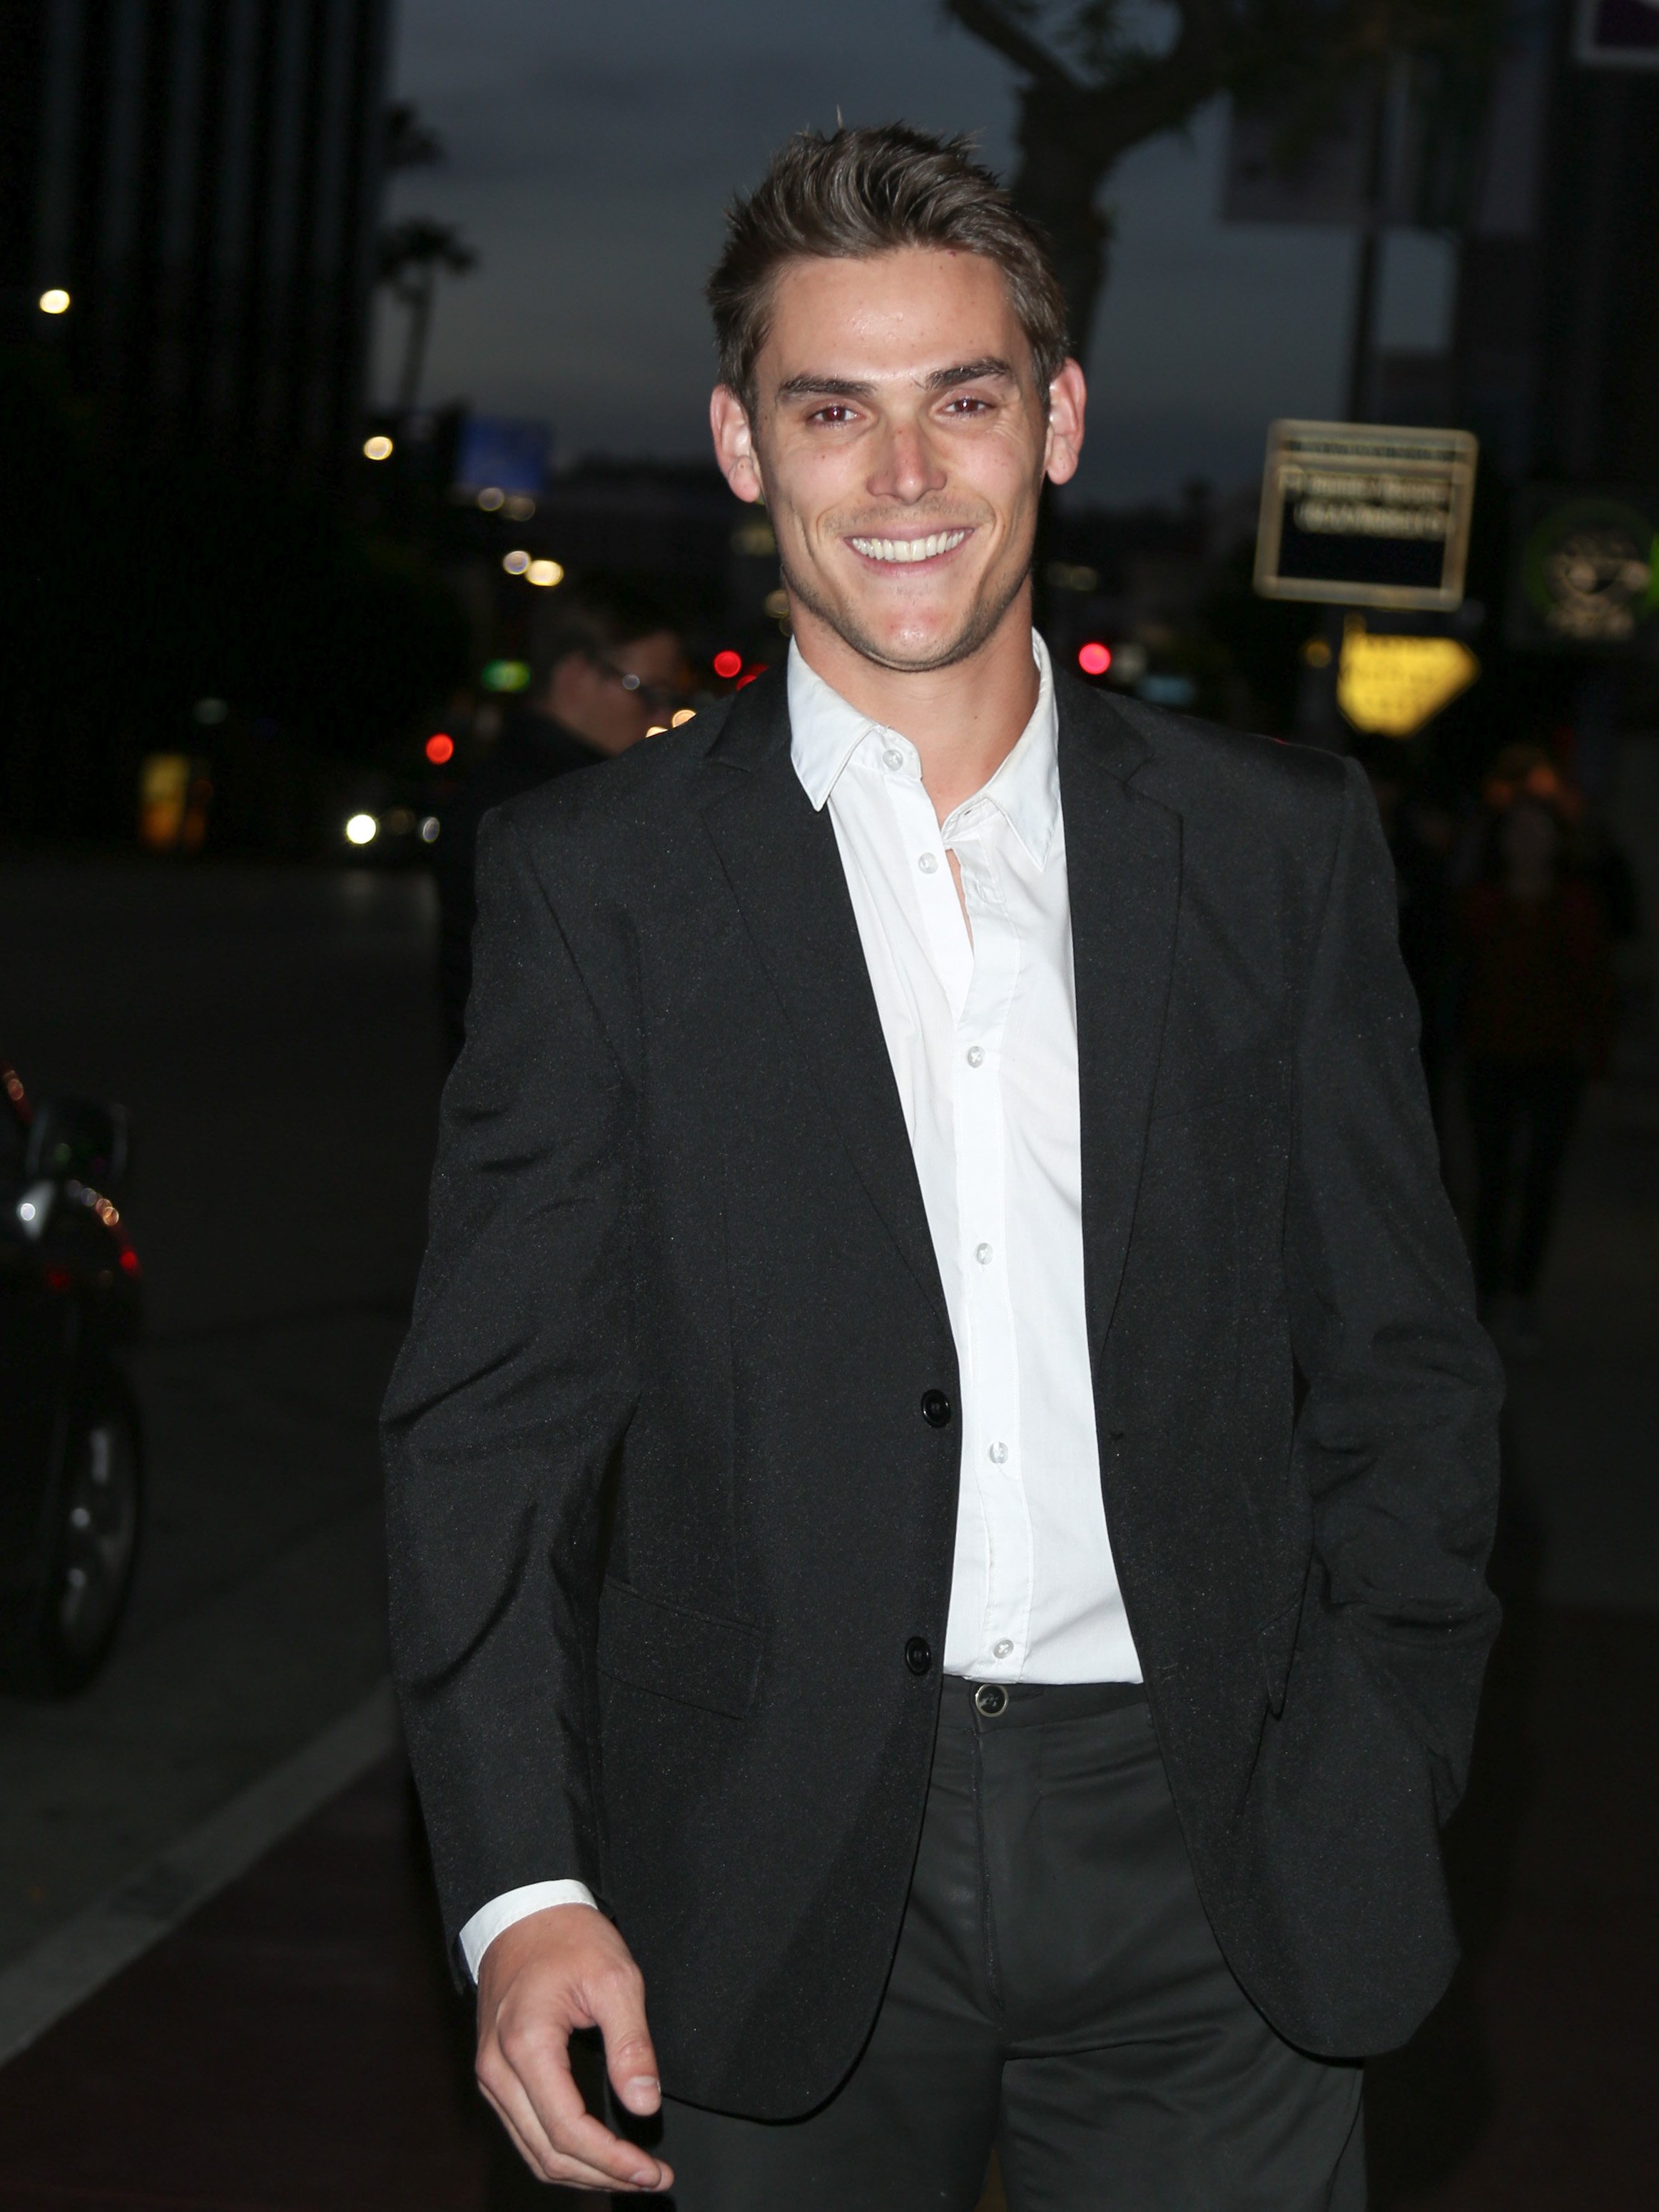 'The Young and the Restless' actor Mark Grossman wearing a black suit and white shirt during a red carpet appearance.